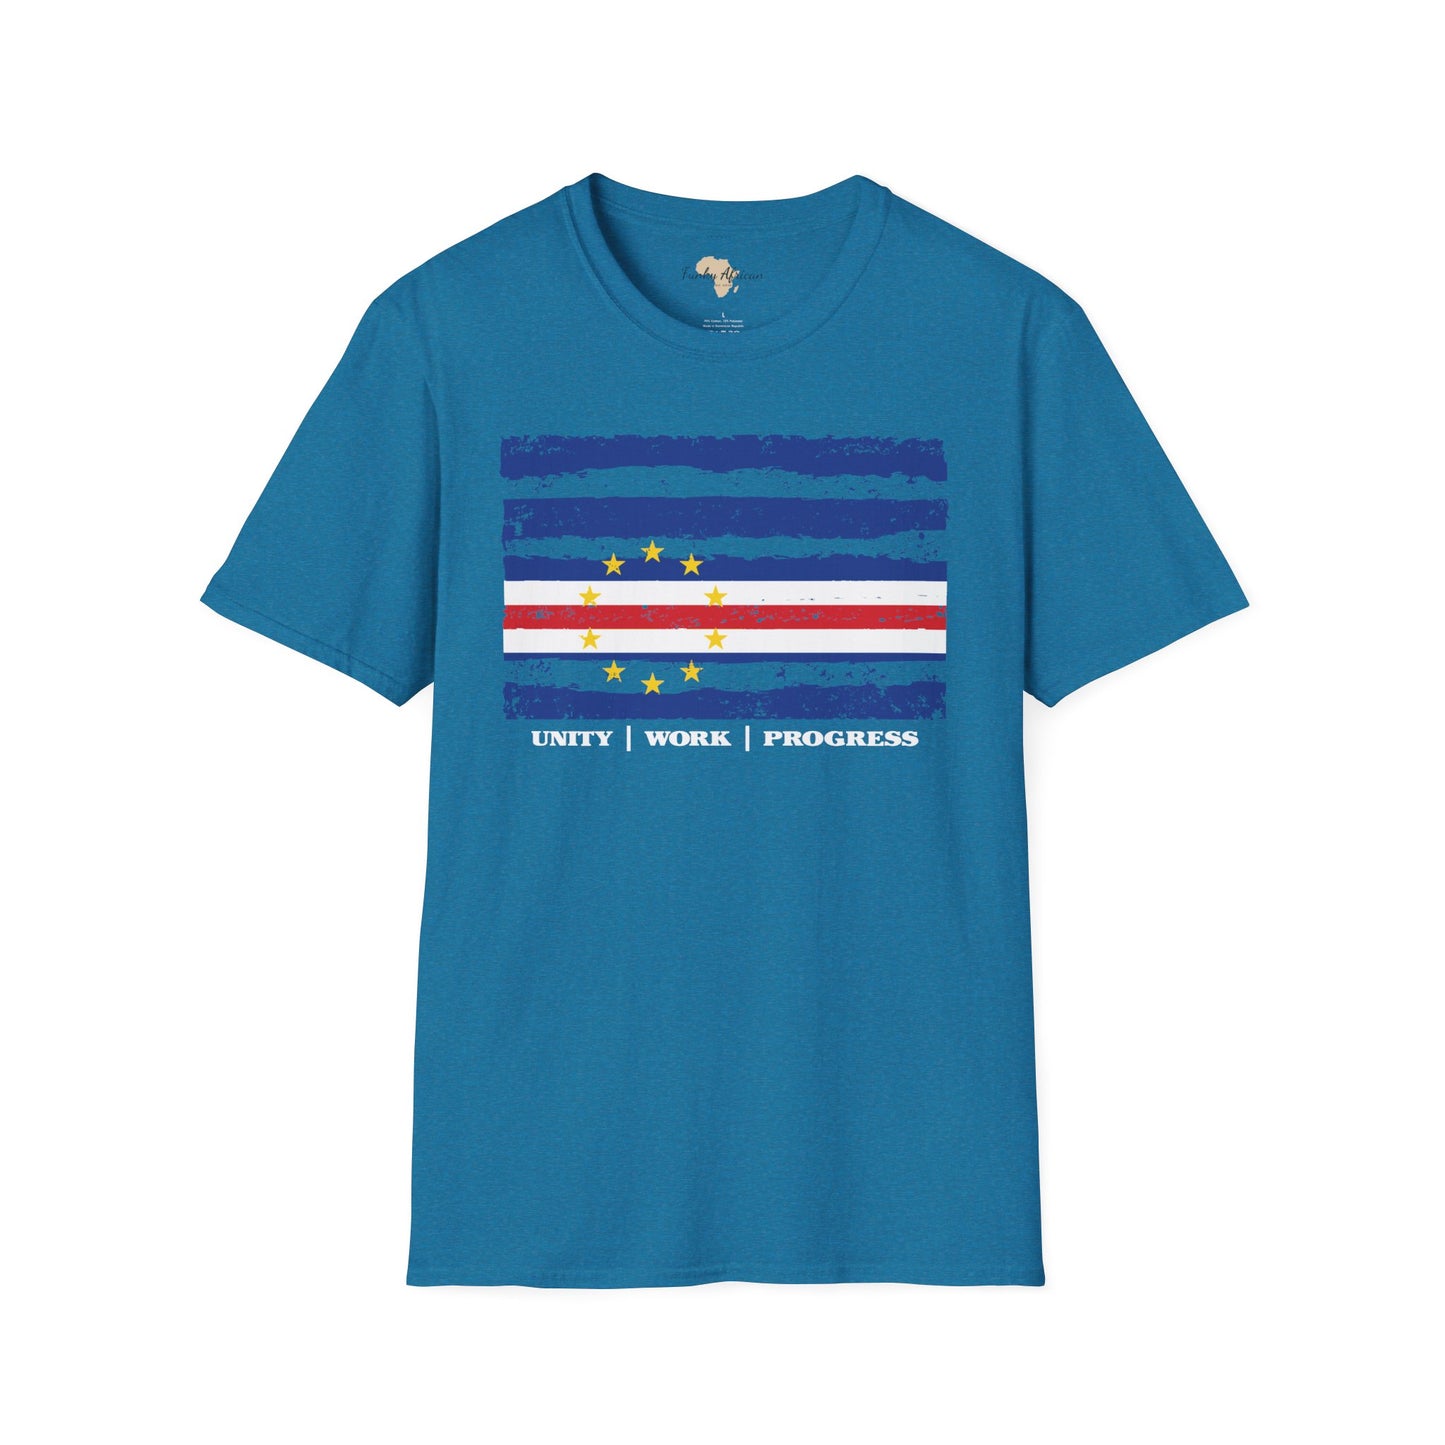 Cabo Verde strip unisex softstyle tee